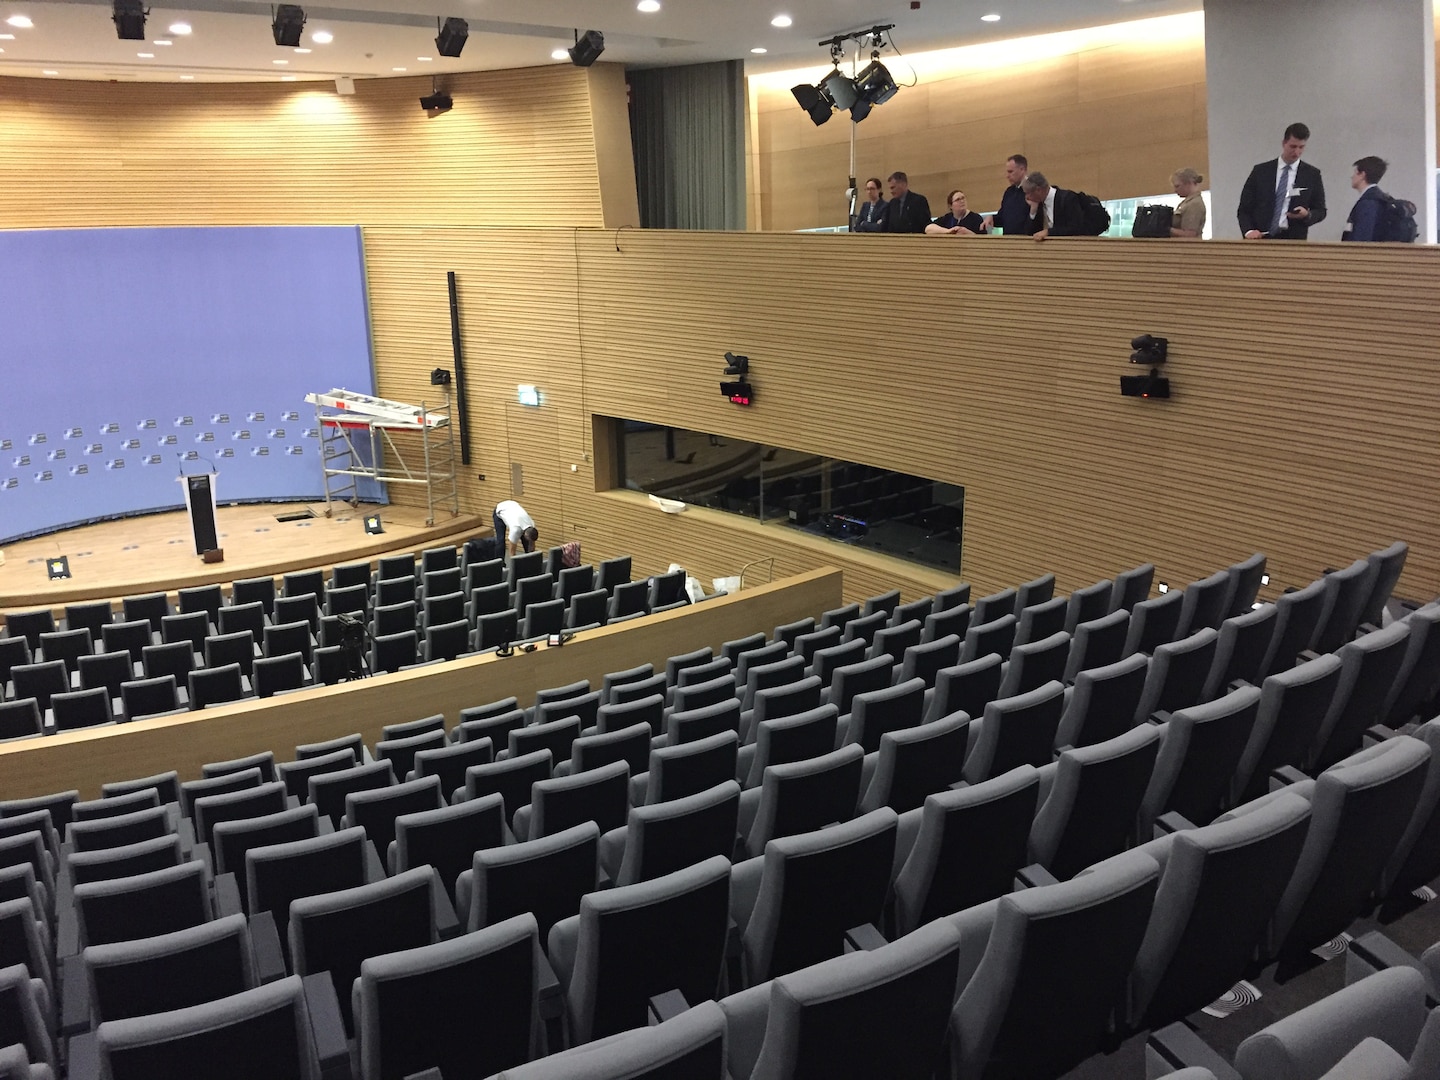 The new press briefing room at the NATO headquarters in Brussels.